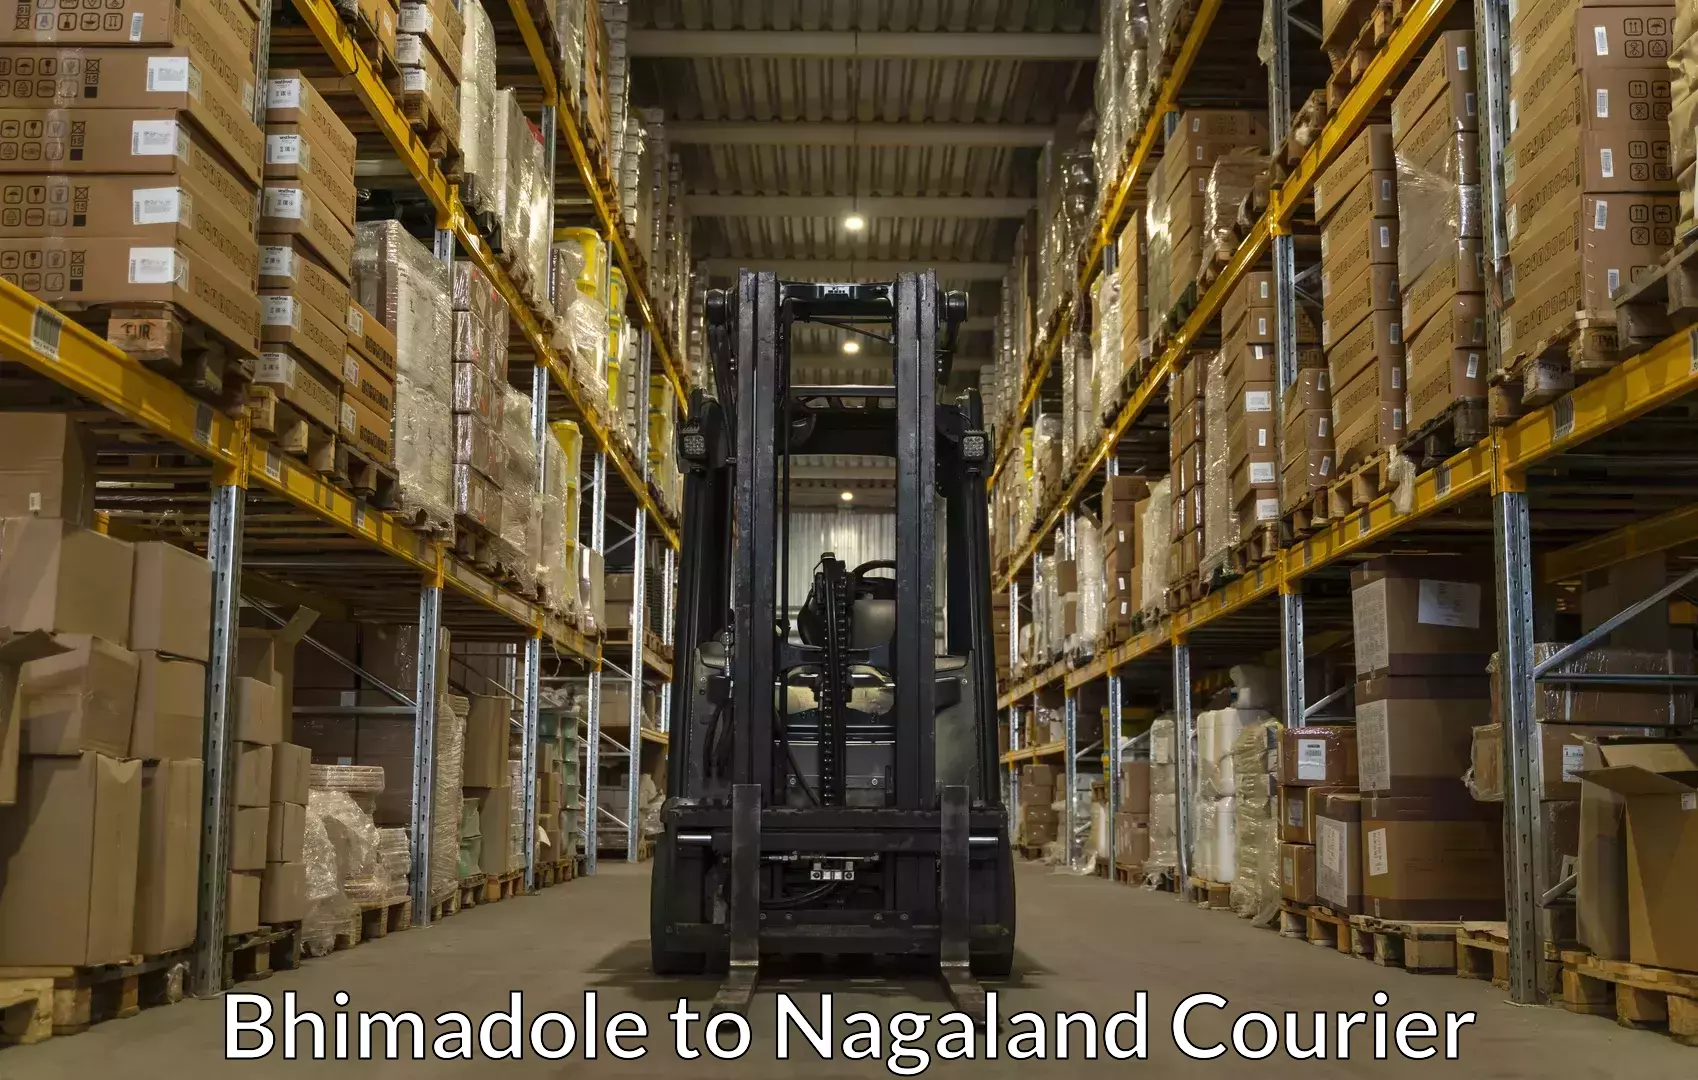 Furniture relocation experts Bhimadole to Nagaland